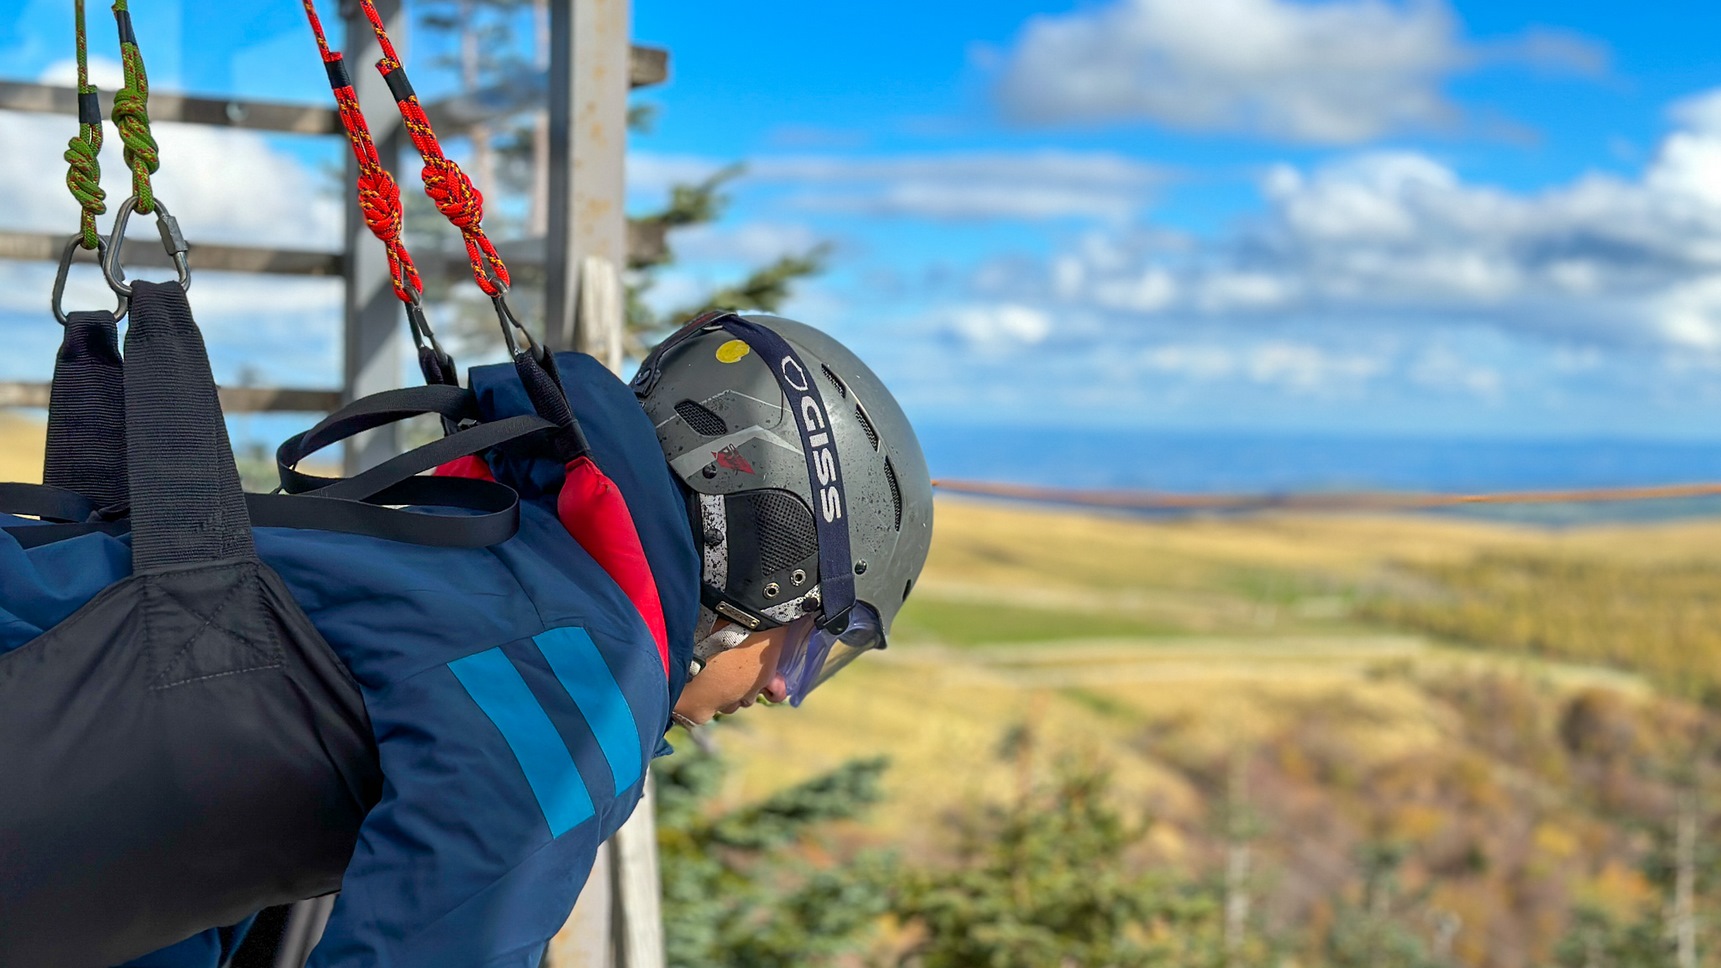 Zipline in Super Besse, ready to experience a descent of 1600 m with a magnificent view of Super Besse